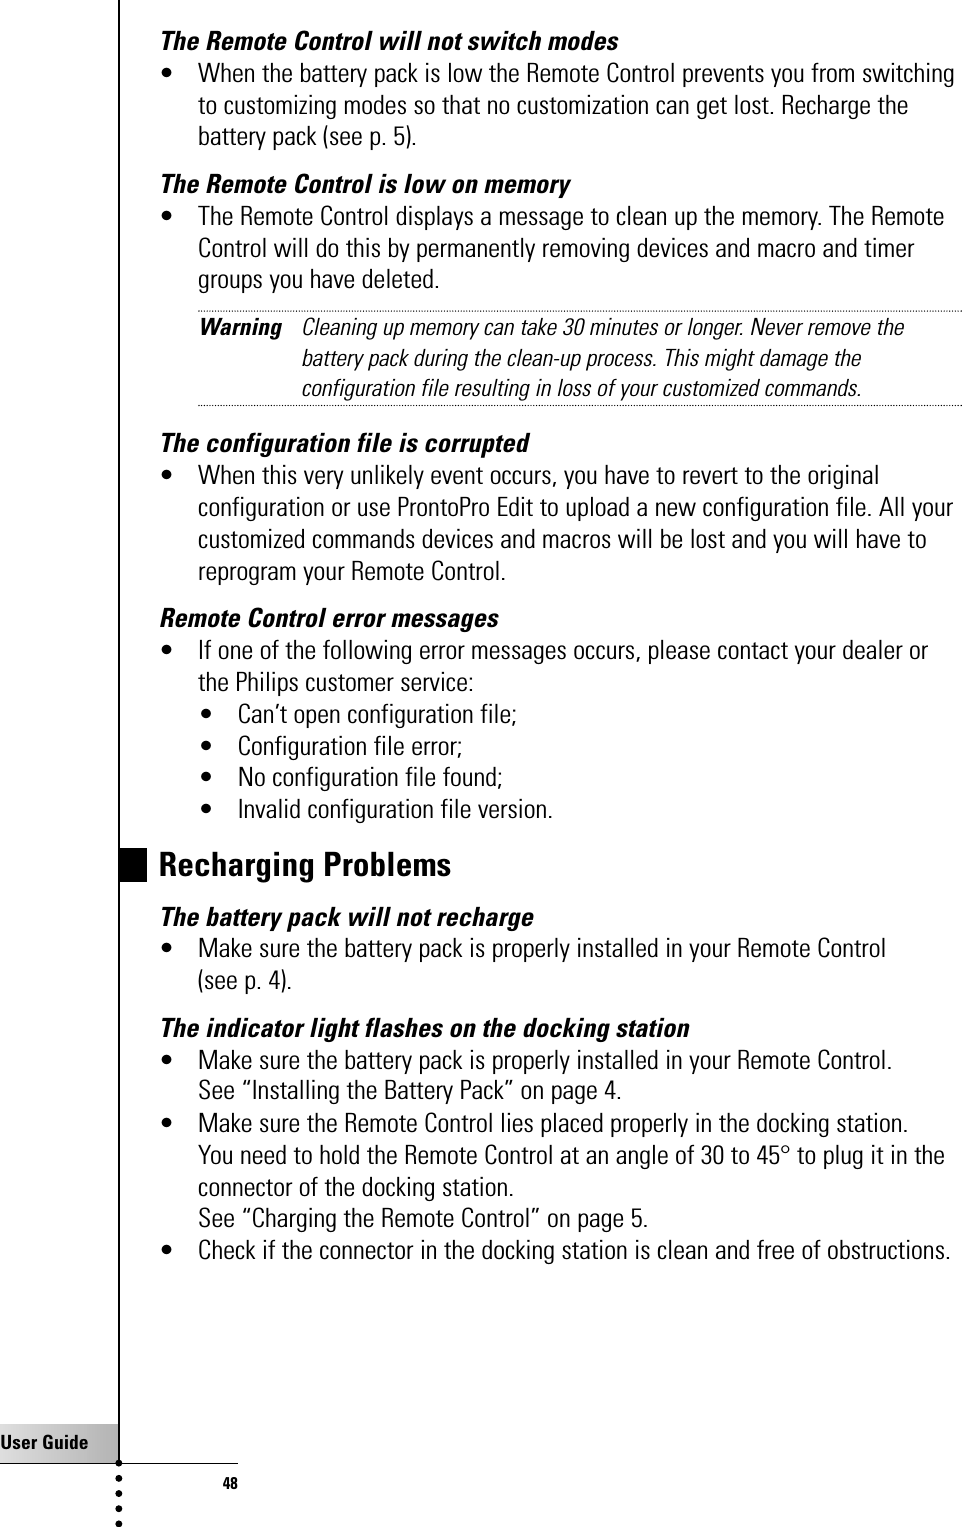 User Guide48The Remote Control will not switch modes• When the battery pack is low the Remote Control prevents you from switchingto customizing modes so that no customization can get lost. Recharge thebattery pack (see p. 5).The Remote Control is low on memory• The Remote Control displays a message to clean up the memory. The RemoteControl will do this by permanently removing devices and macro and timergroups you have deleted.Warning Cleaning up memory can take 30 minutes or longer. Never remove thebattery pack during the clean-up process. This might damage theconfiguration file resulting in loss of your customized commands.The configuration file is corrupted• When this very unlikely event occurs, you have to revert to the originalconfiguration or use ProntoPro Edit to upload a new configuration file. All yourcustomized commands devices and macros will be lost and you will have toreprogram your Remote Control.Remote Control error messages• If one of the following error messages occurs, please contact your dealer orthe Philips customer service:• Can’t open configuration file;• Configuration file error;• No configuration file found;• Invalid configuration file version.Recharging ProblemsThe battery pack will not recharge• Make sure the battery pack is properly installed in your Remote Control (see p. 4).The indicator light flashes on the docking station• Make sure the battery pack is properly installed in your Remote Control. See “Installing the Battery Pack” on page 4.• Make sure the Remote Control lies placed properly in the docking station. You need to hold the Remote Control at an angle of 30 to 45° to plug it in theconnector of the docking station.See “Charging the Remote Control” on page 5.• Check if the connector in the docking station is clean and free of obstructions.Troubleshooting